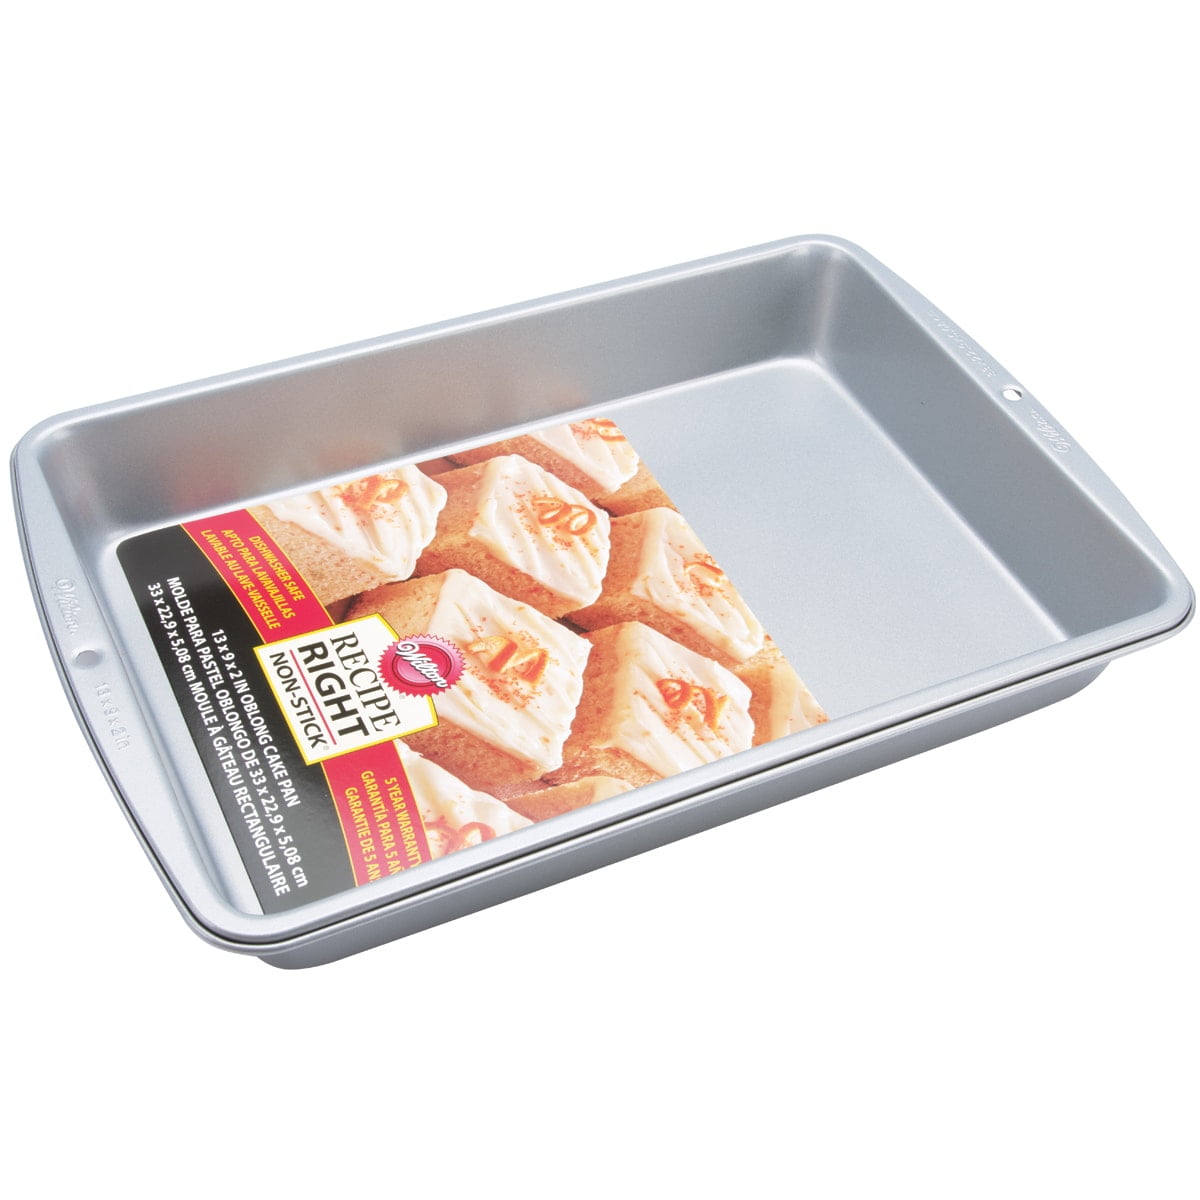 4010 N-S 13 X 9 Oblong Bake Pan - Non Stick, 1 - Dillons Food Stores